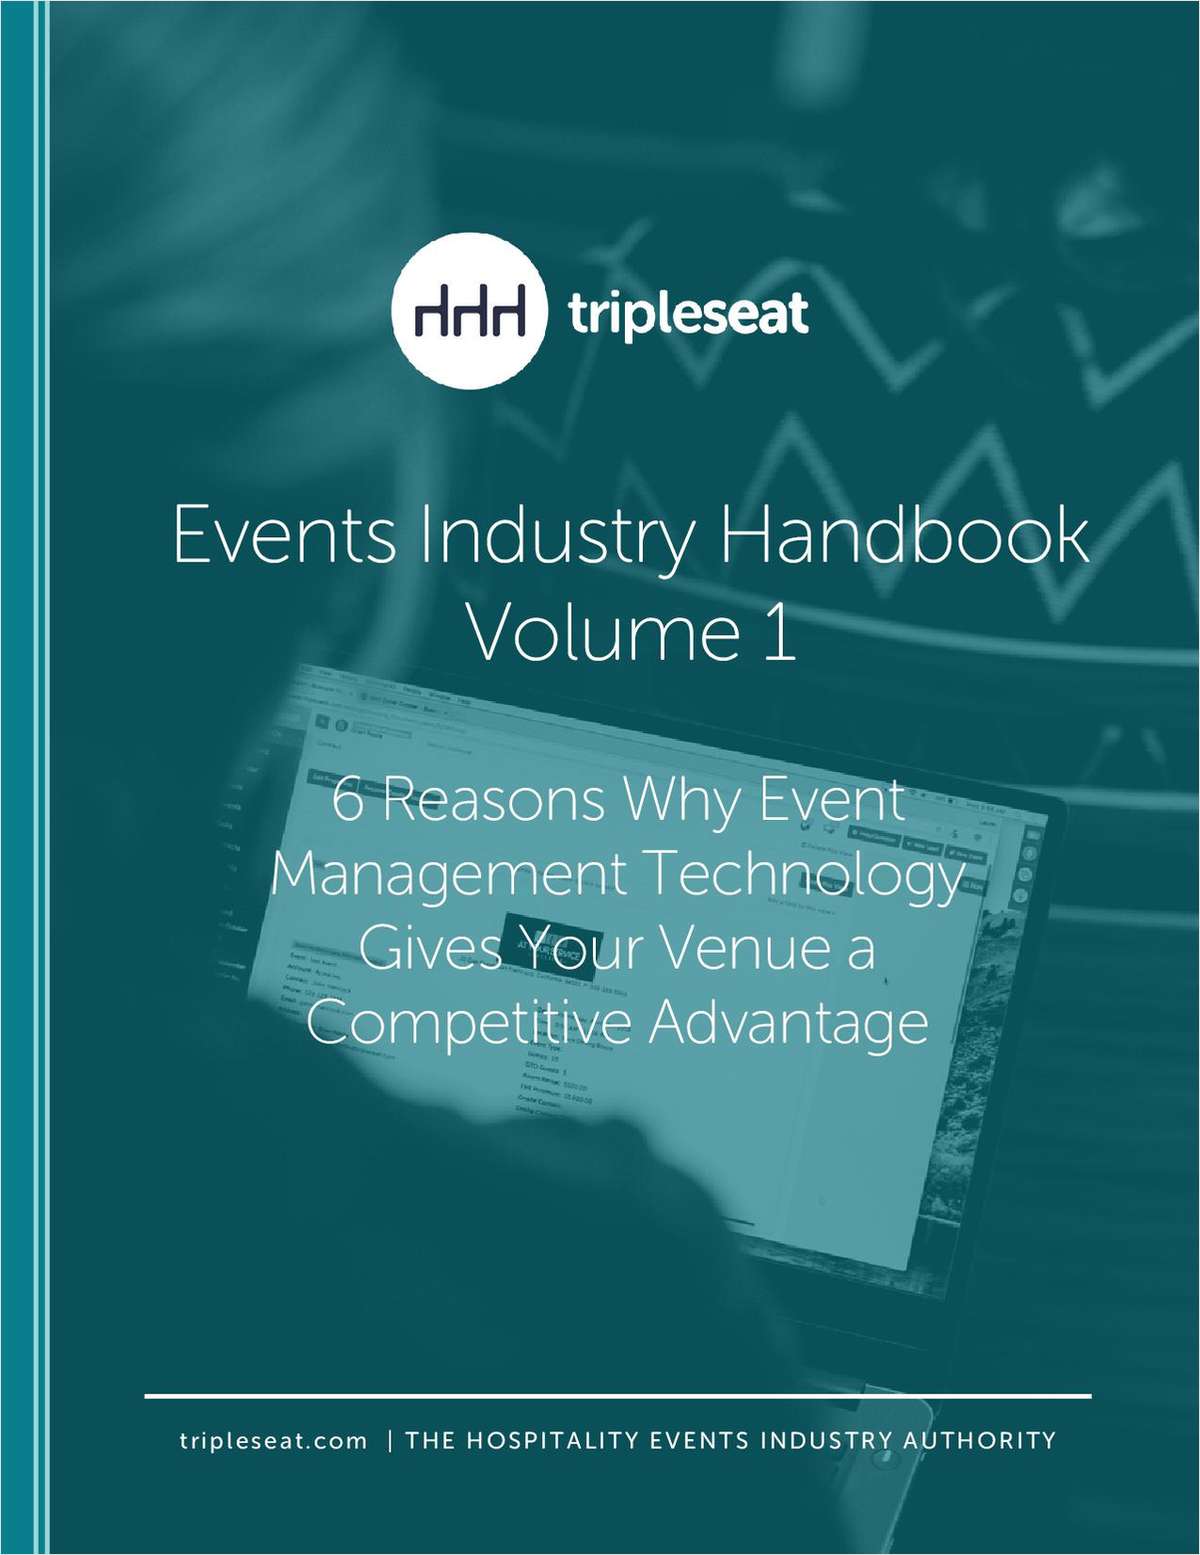 6 Reasons Why Event Management Technology Gives Your Venue a Competitive Advantage